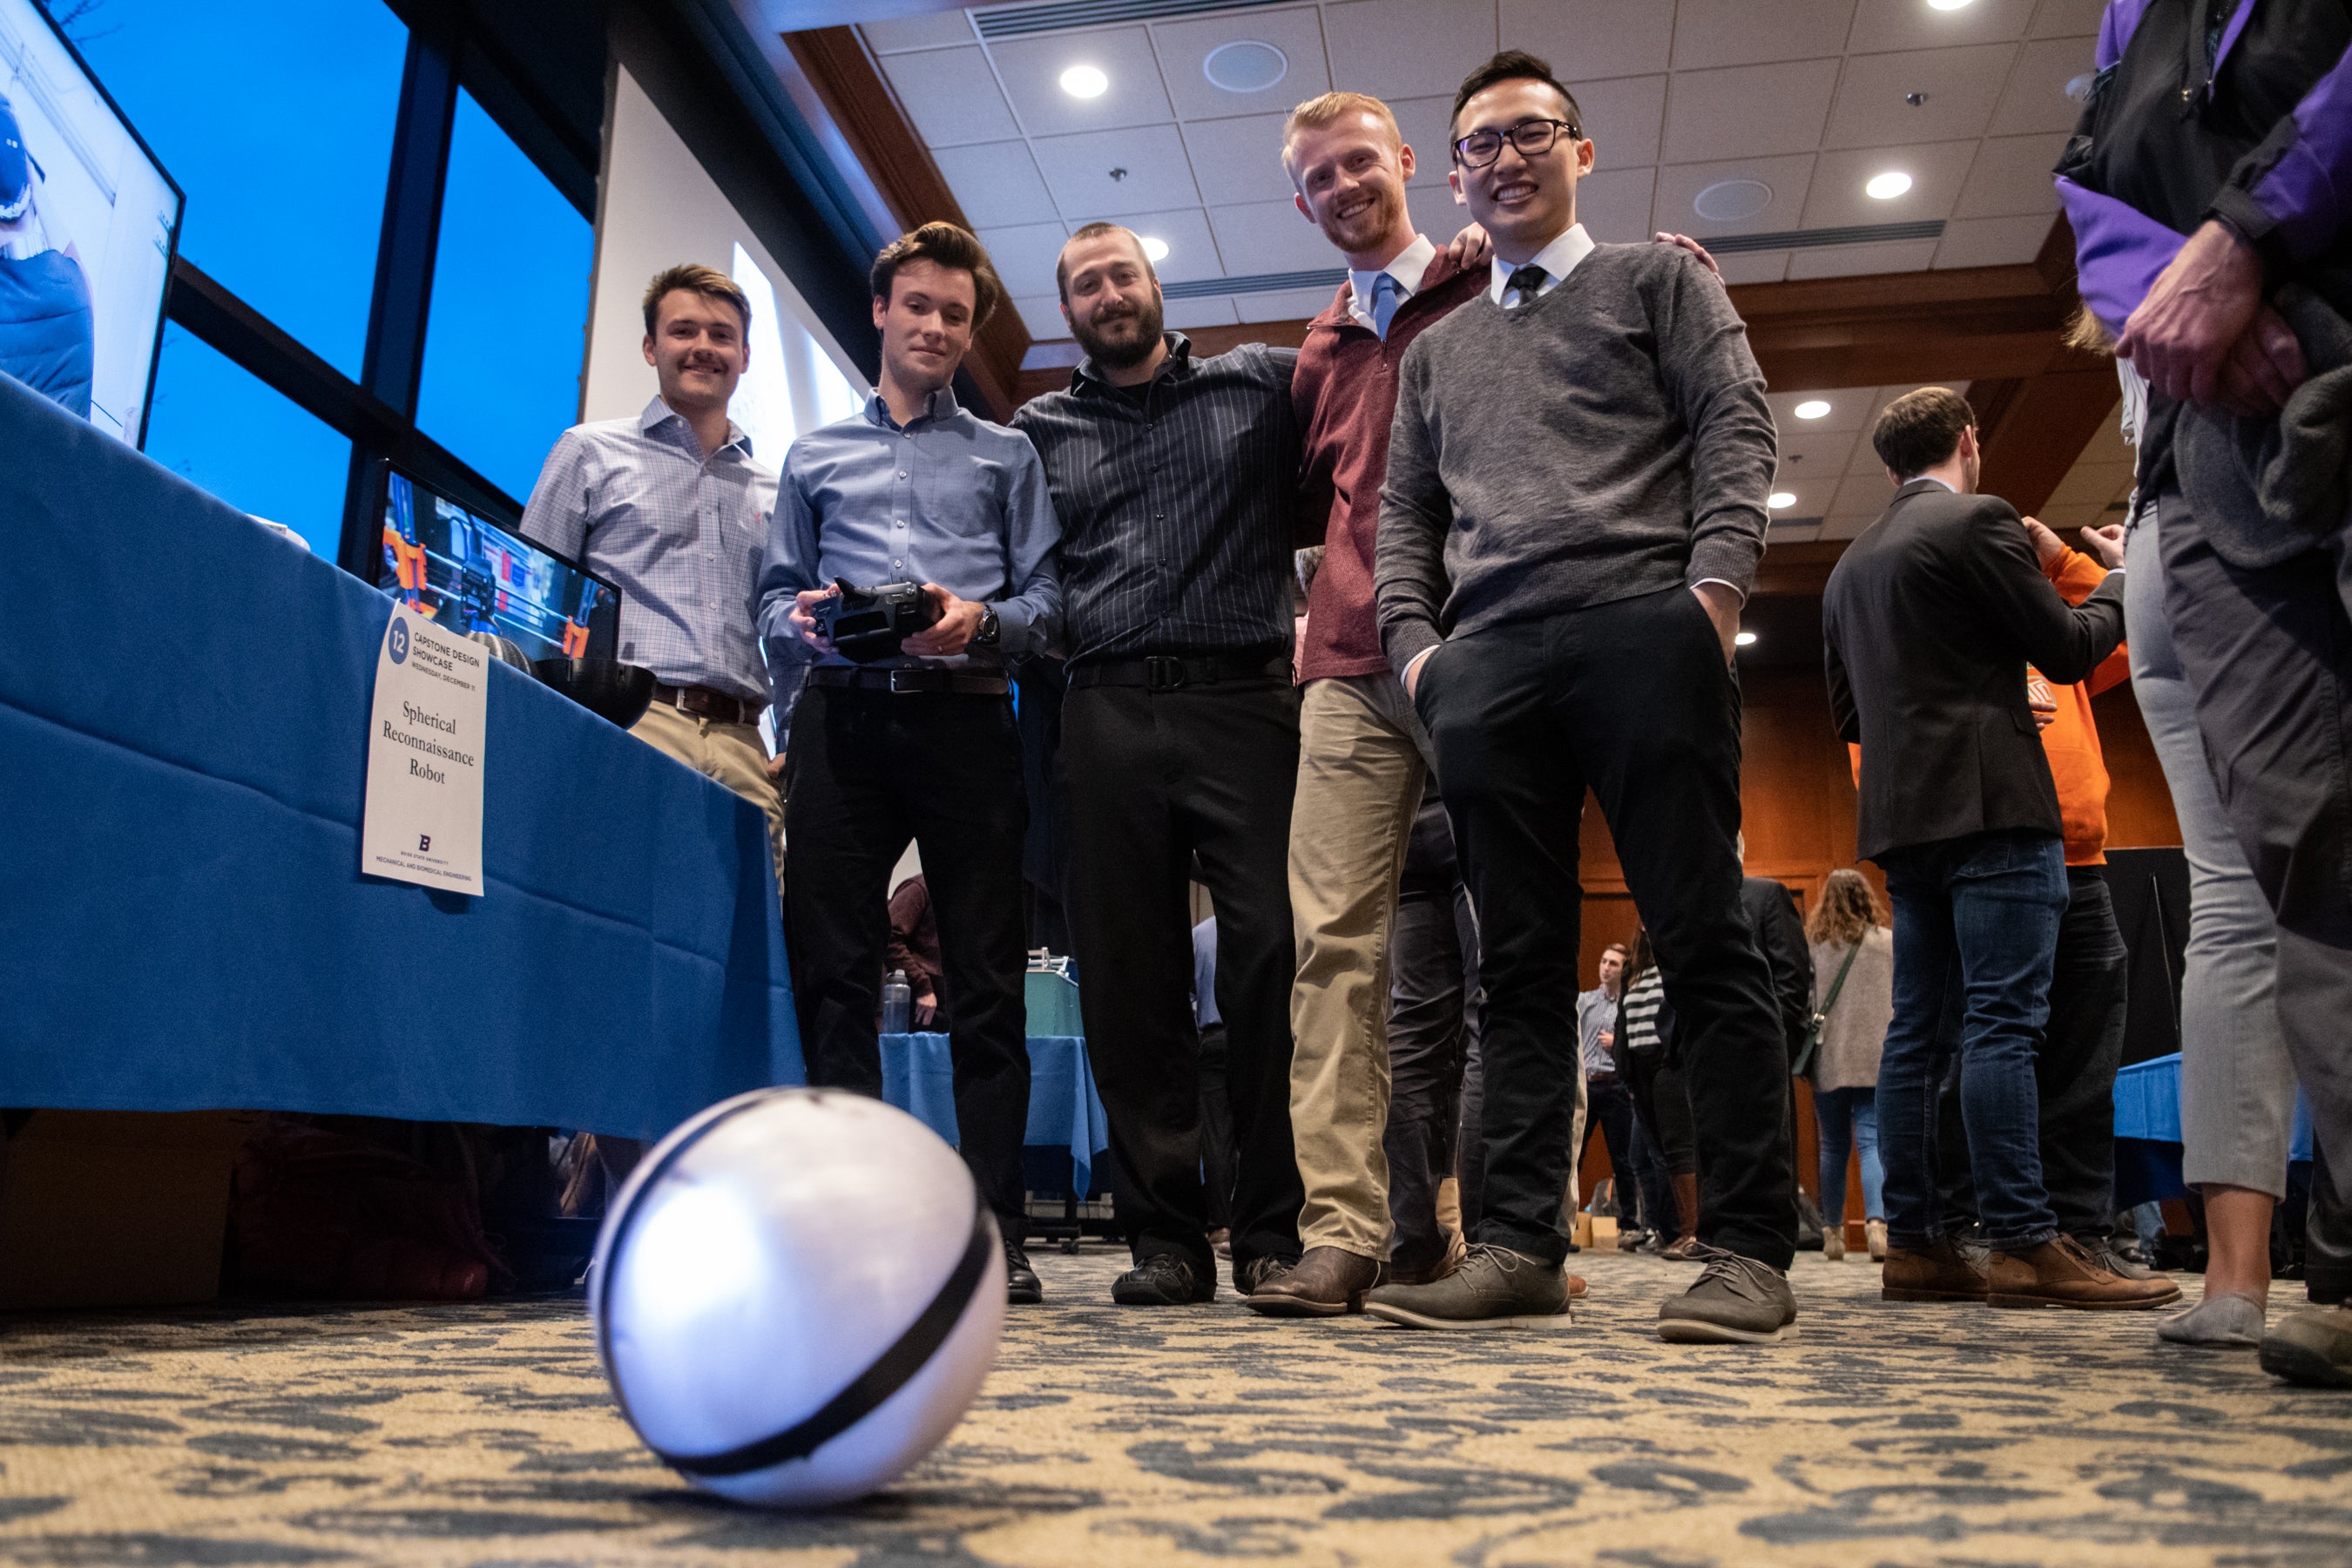 Team of students look down at spherical robot on ground